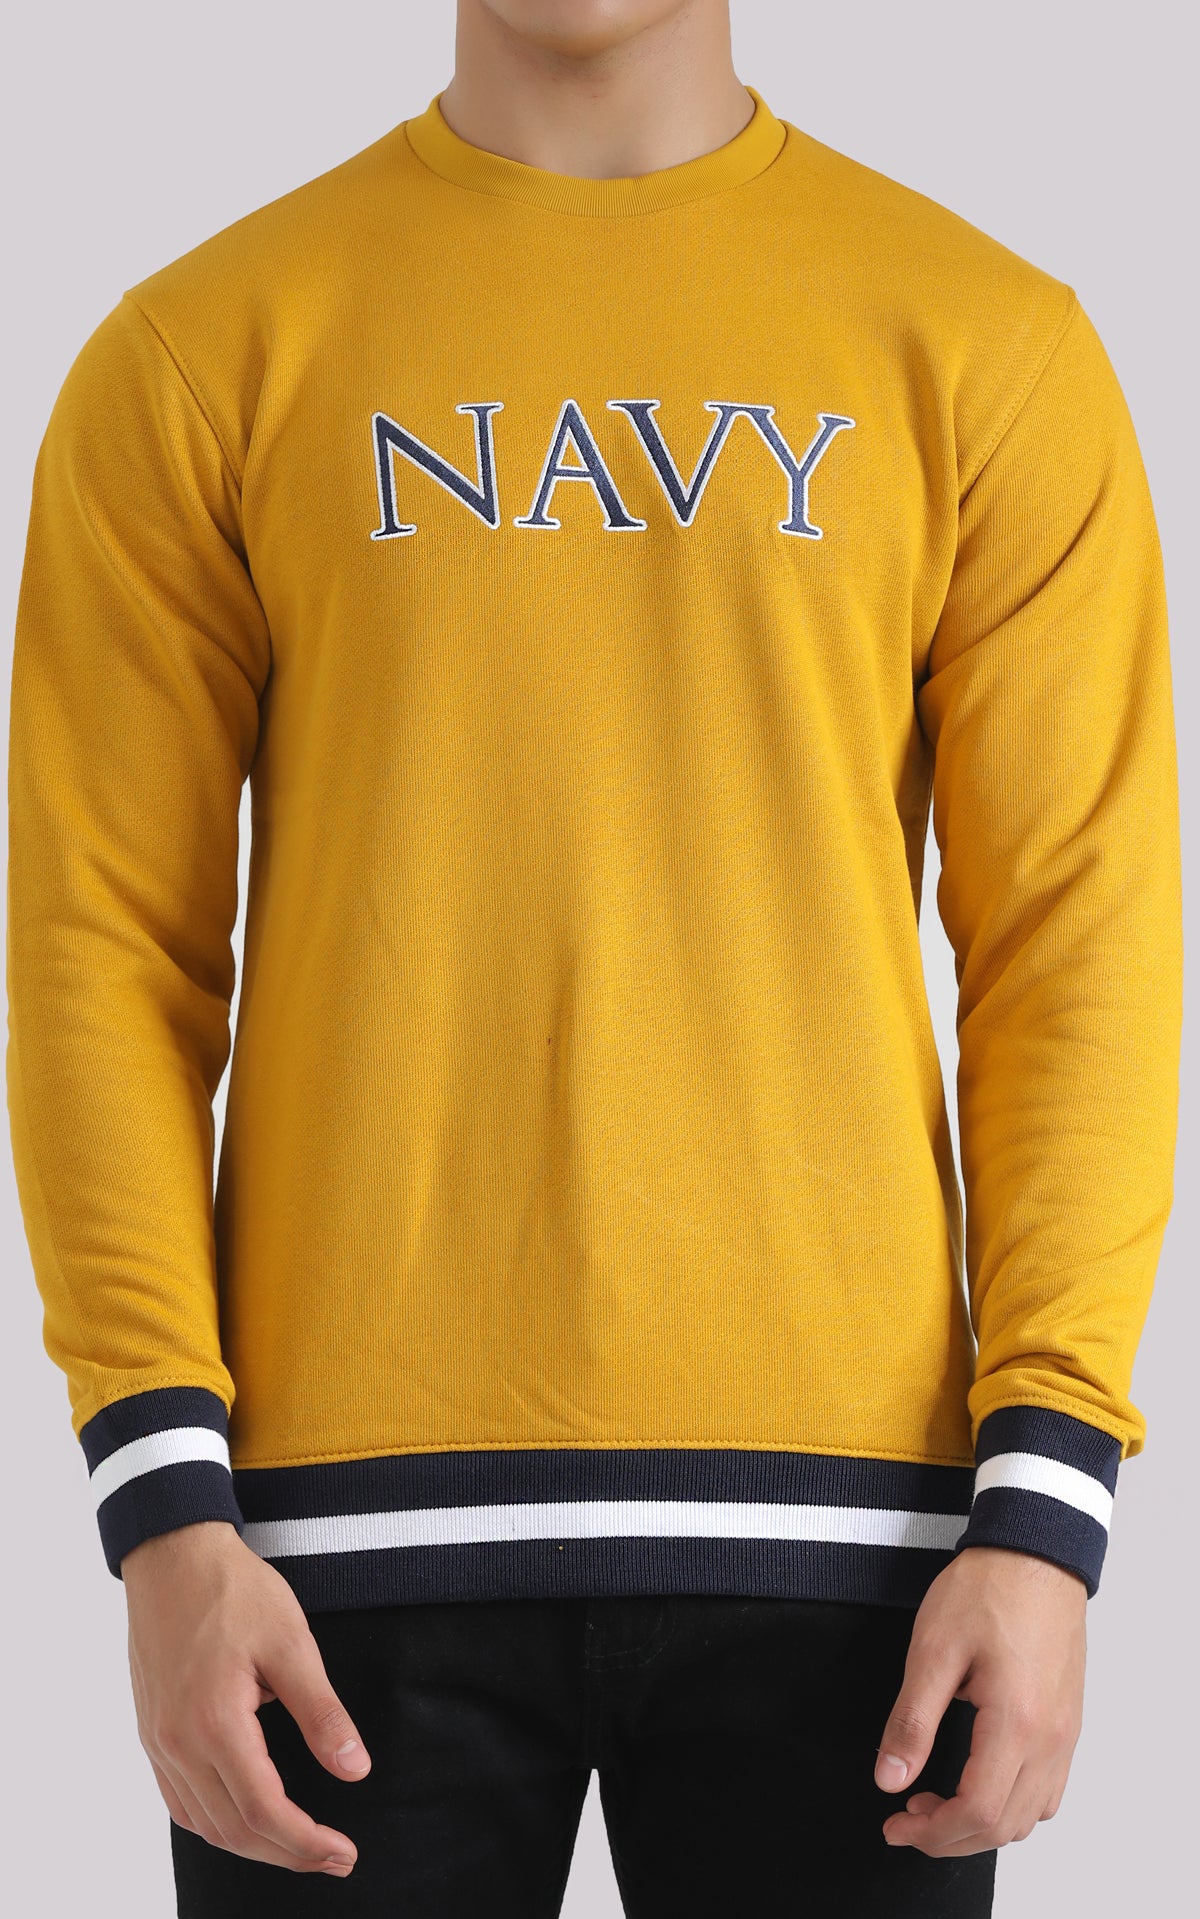 NAVY EMBROIDED SWEAT SHIRT